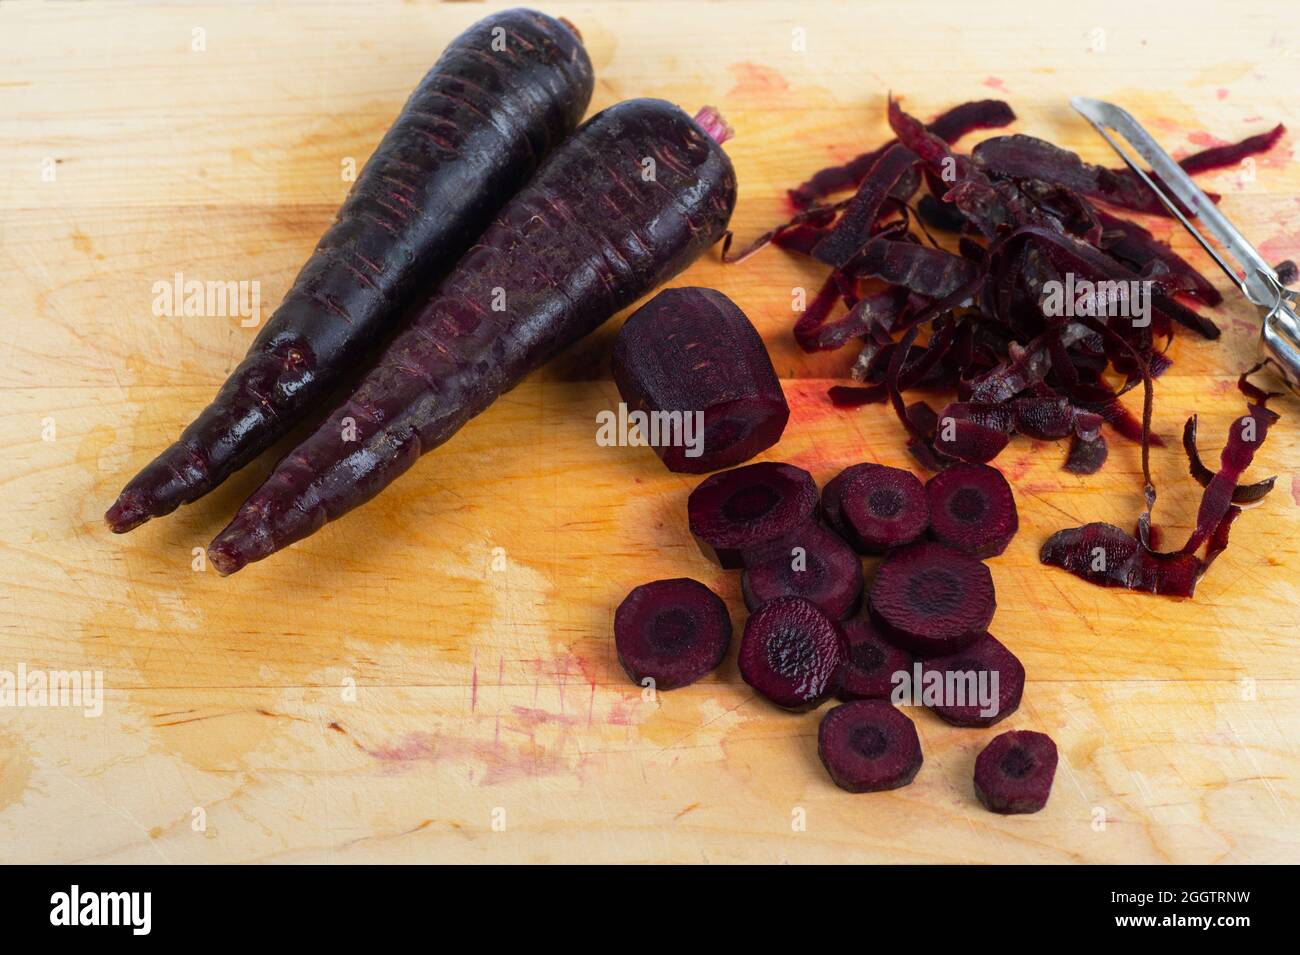 Organic black carrots, peeled and sliced on a cutting board. Stock Photo